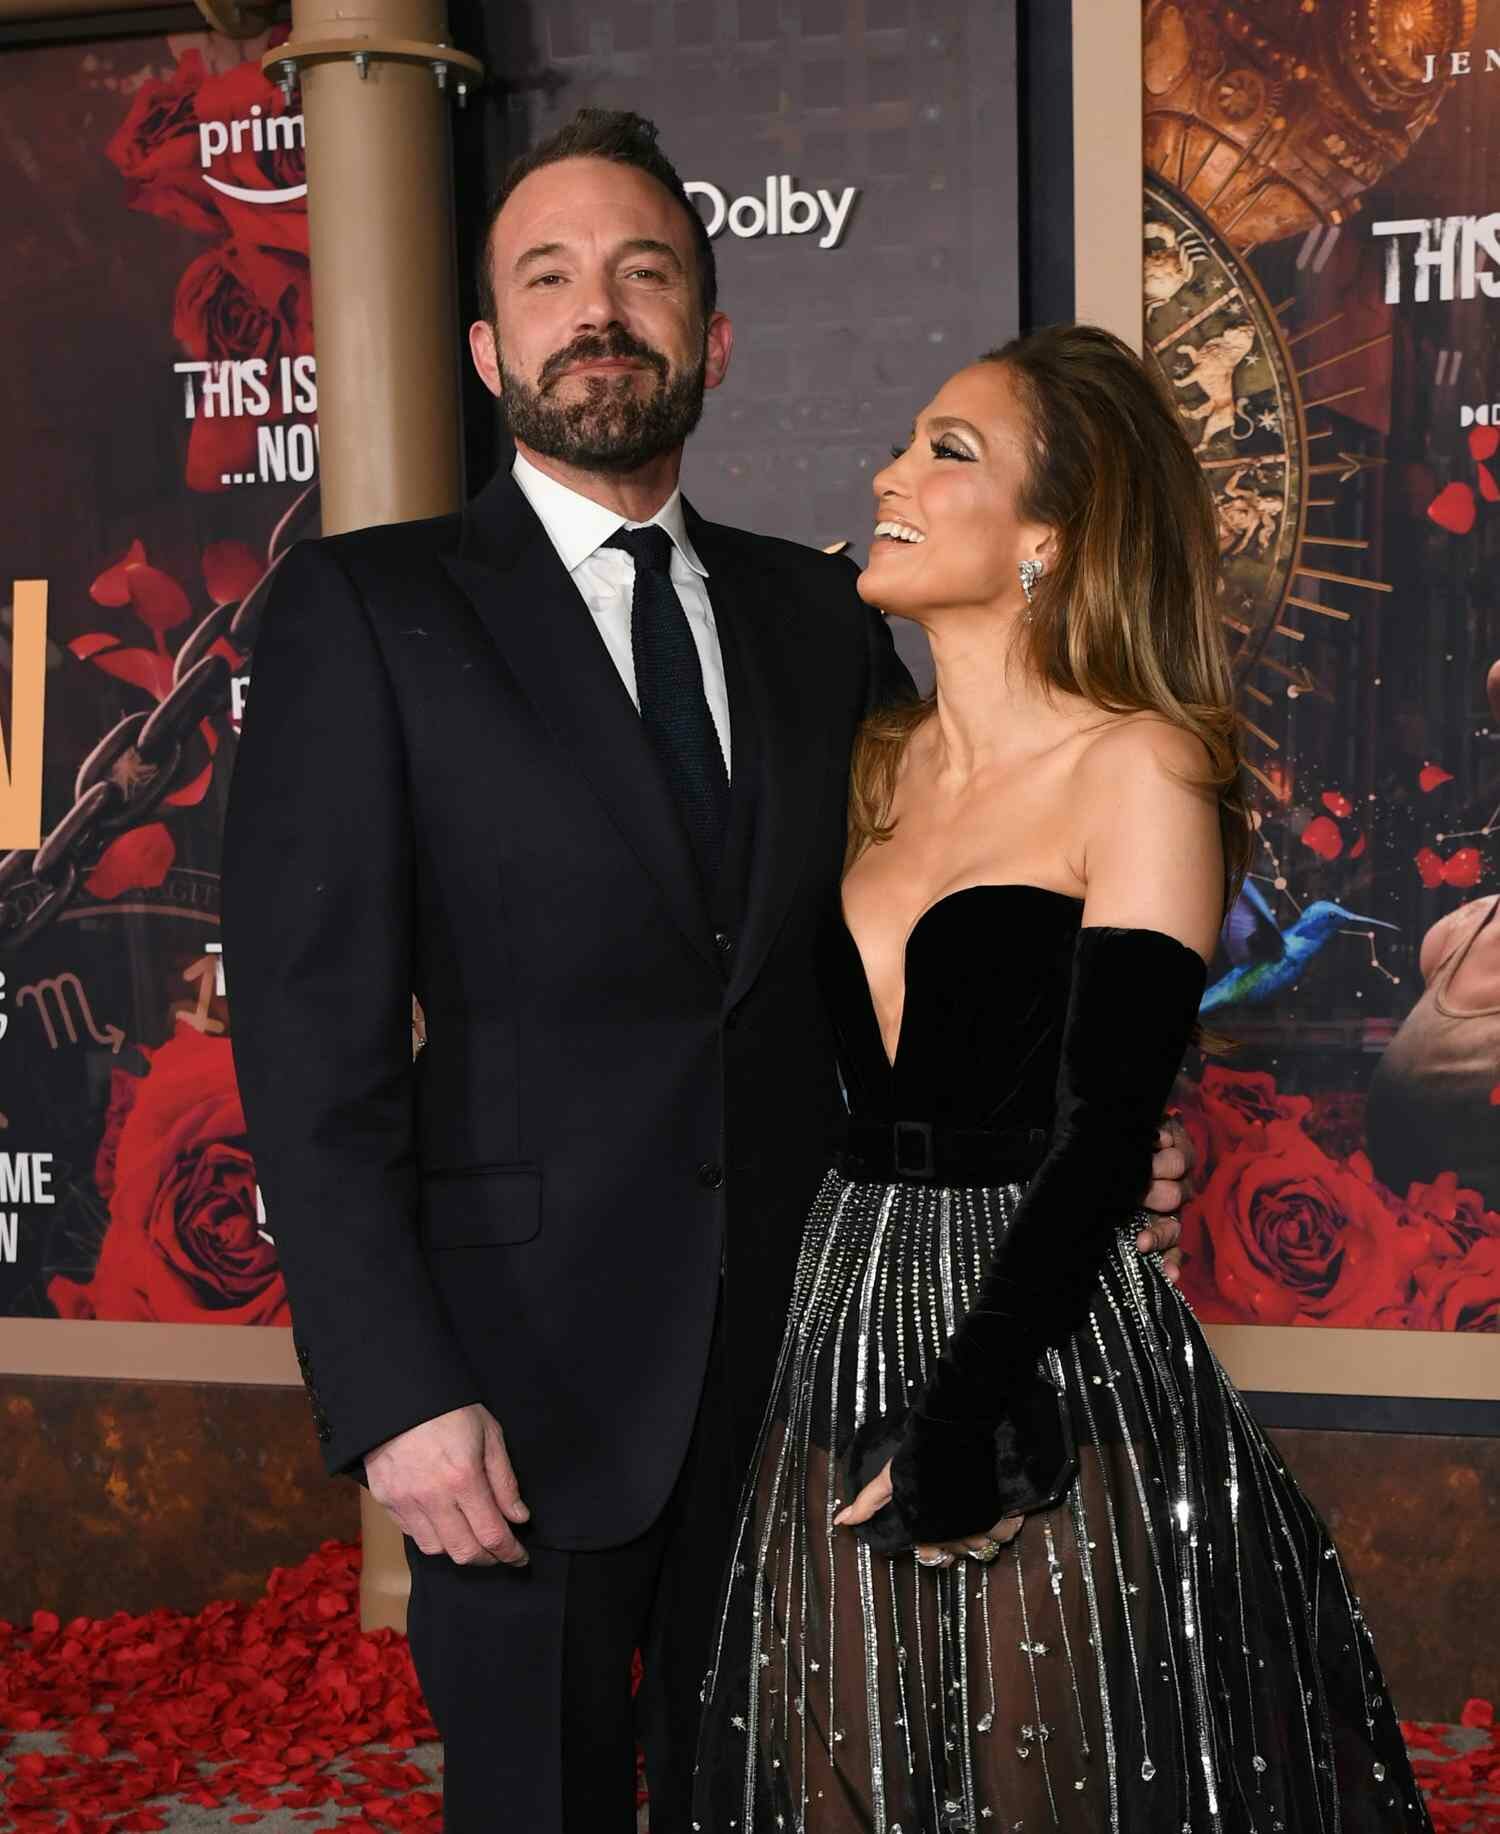 Jennifer Lopez Looking Up and Smiling at Ben Affleck 'This Is Me...Now' Premiere